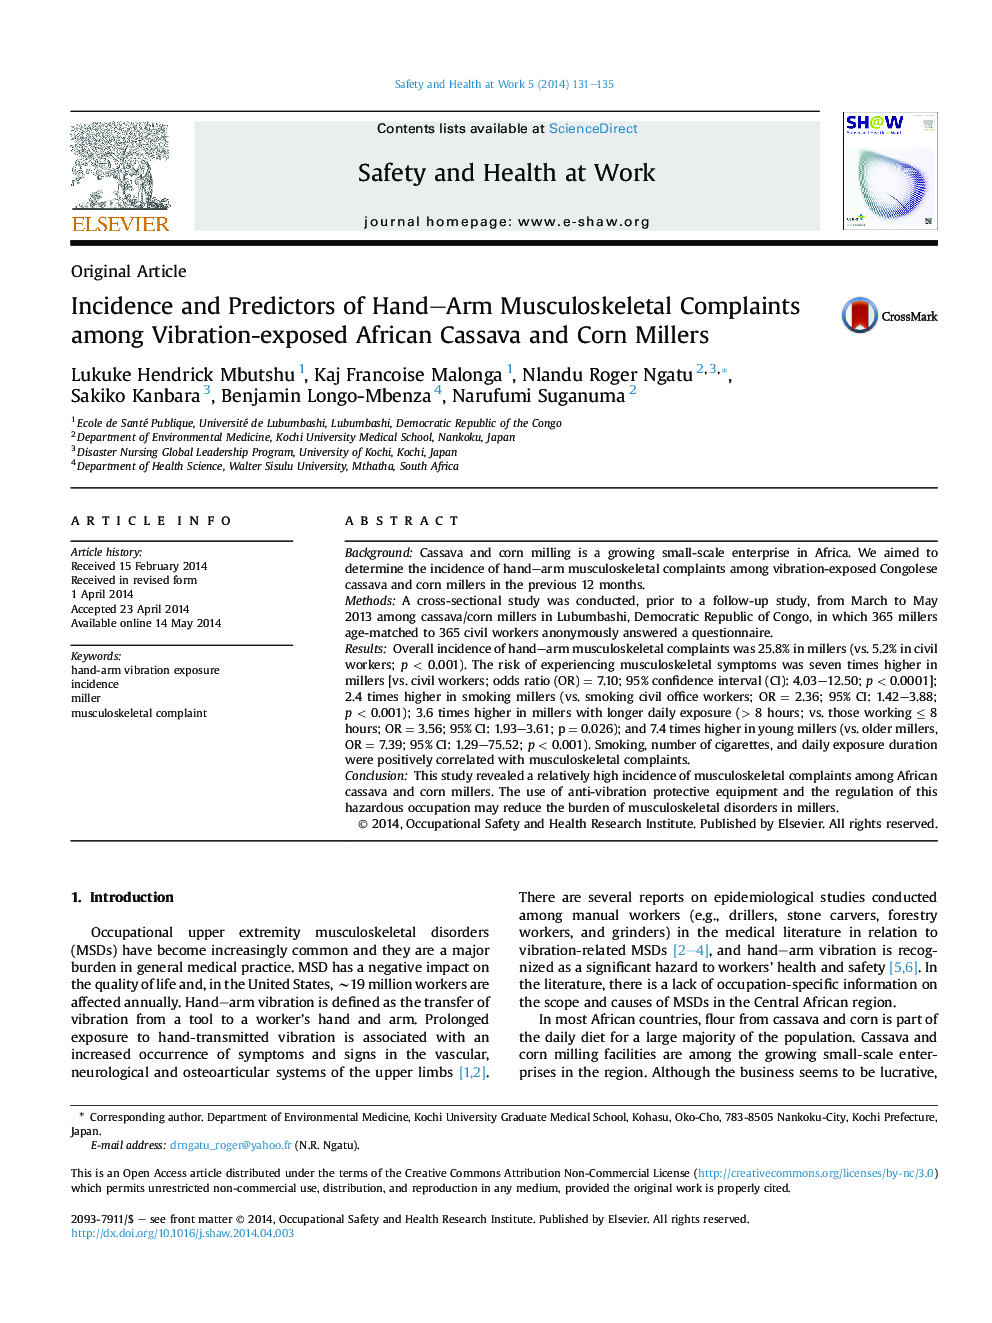 Incidence and Predictors of Hand–Arm Musculoskeletal Complaints among Vibration-exposed African Cassava and Corn Millers 